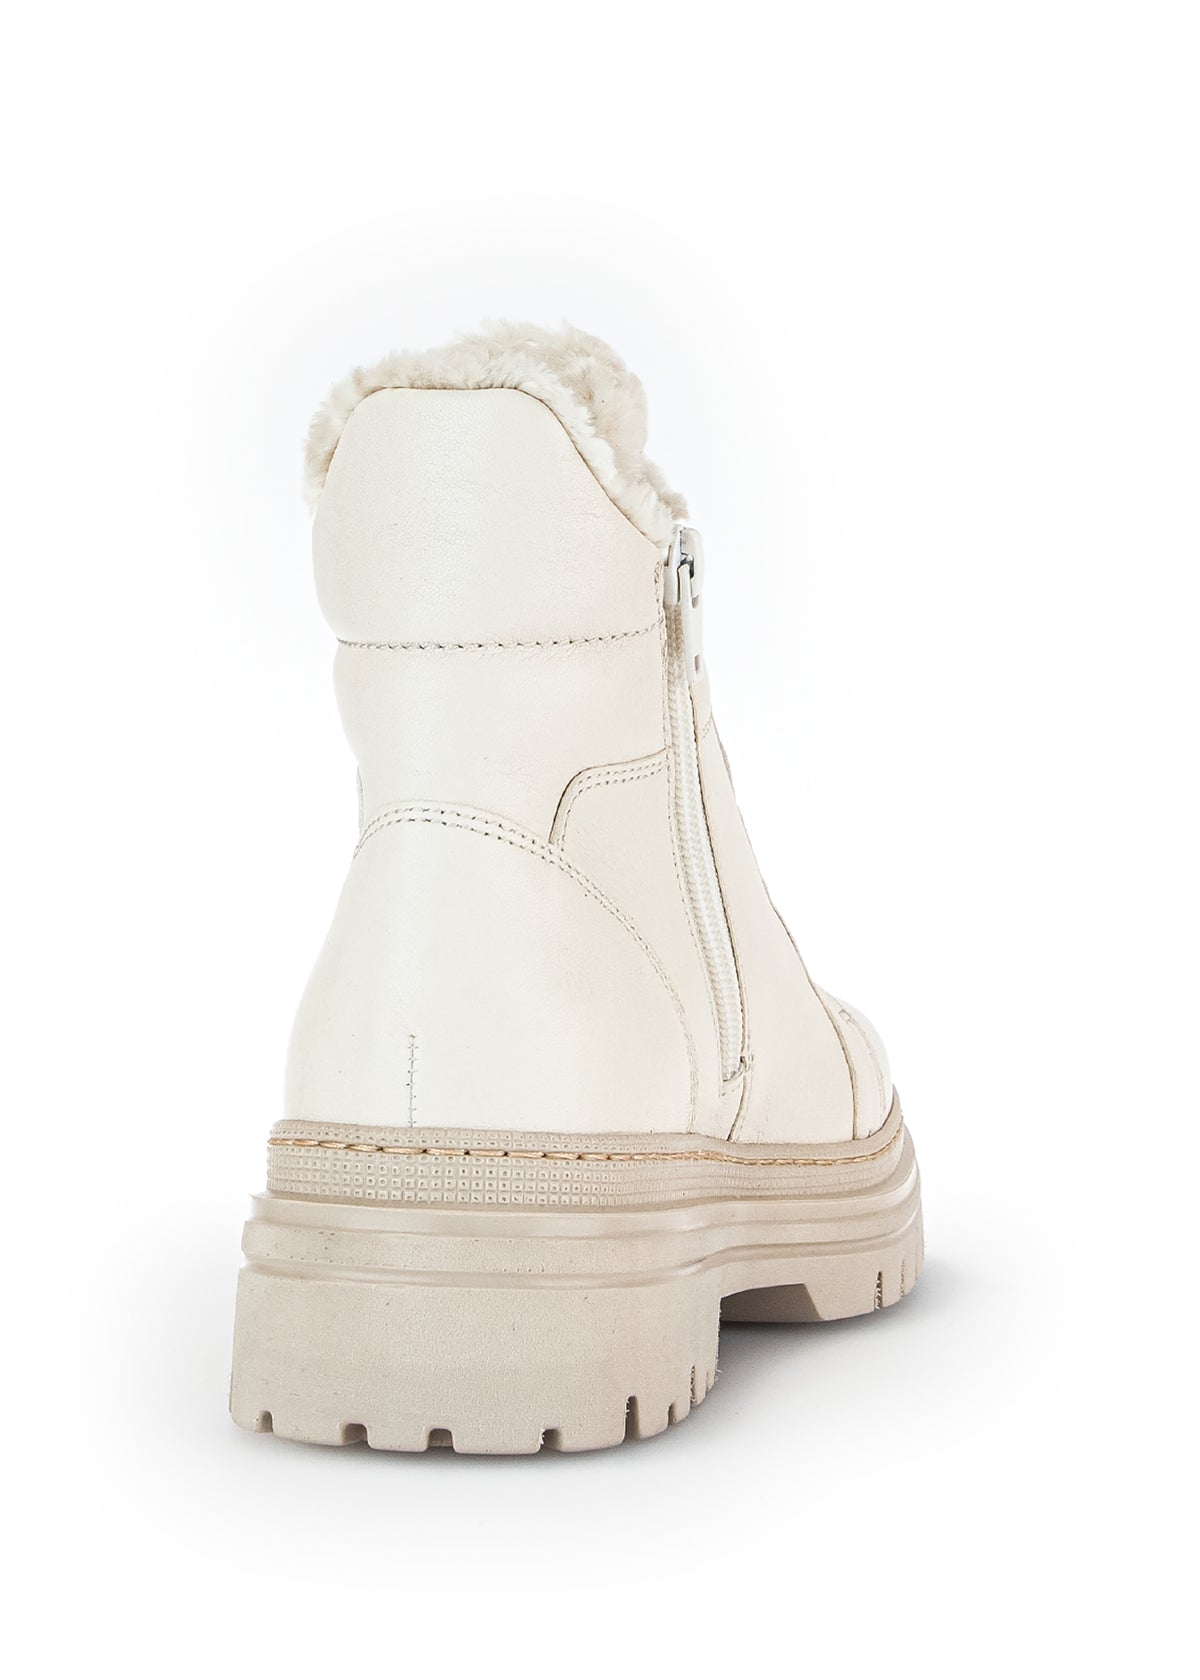 Winter boots with a thick sole - cream